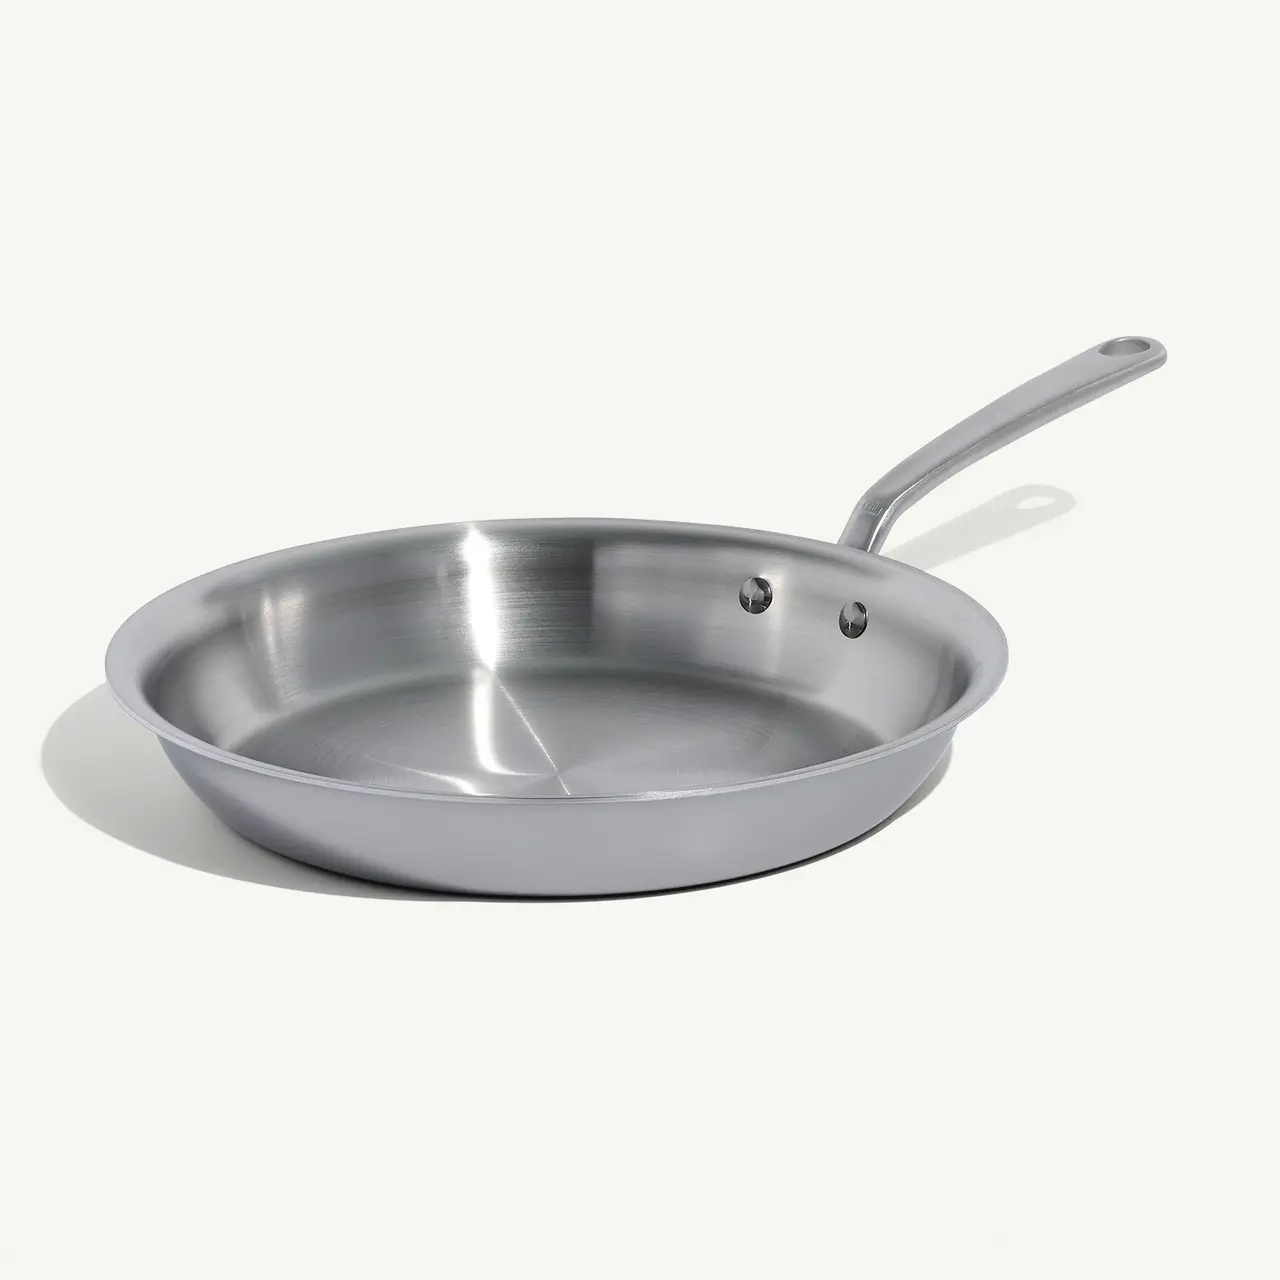 A stainless steel frying pan with a long handle on a white background.